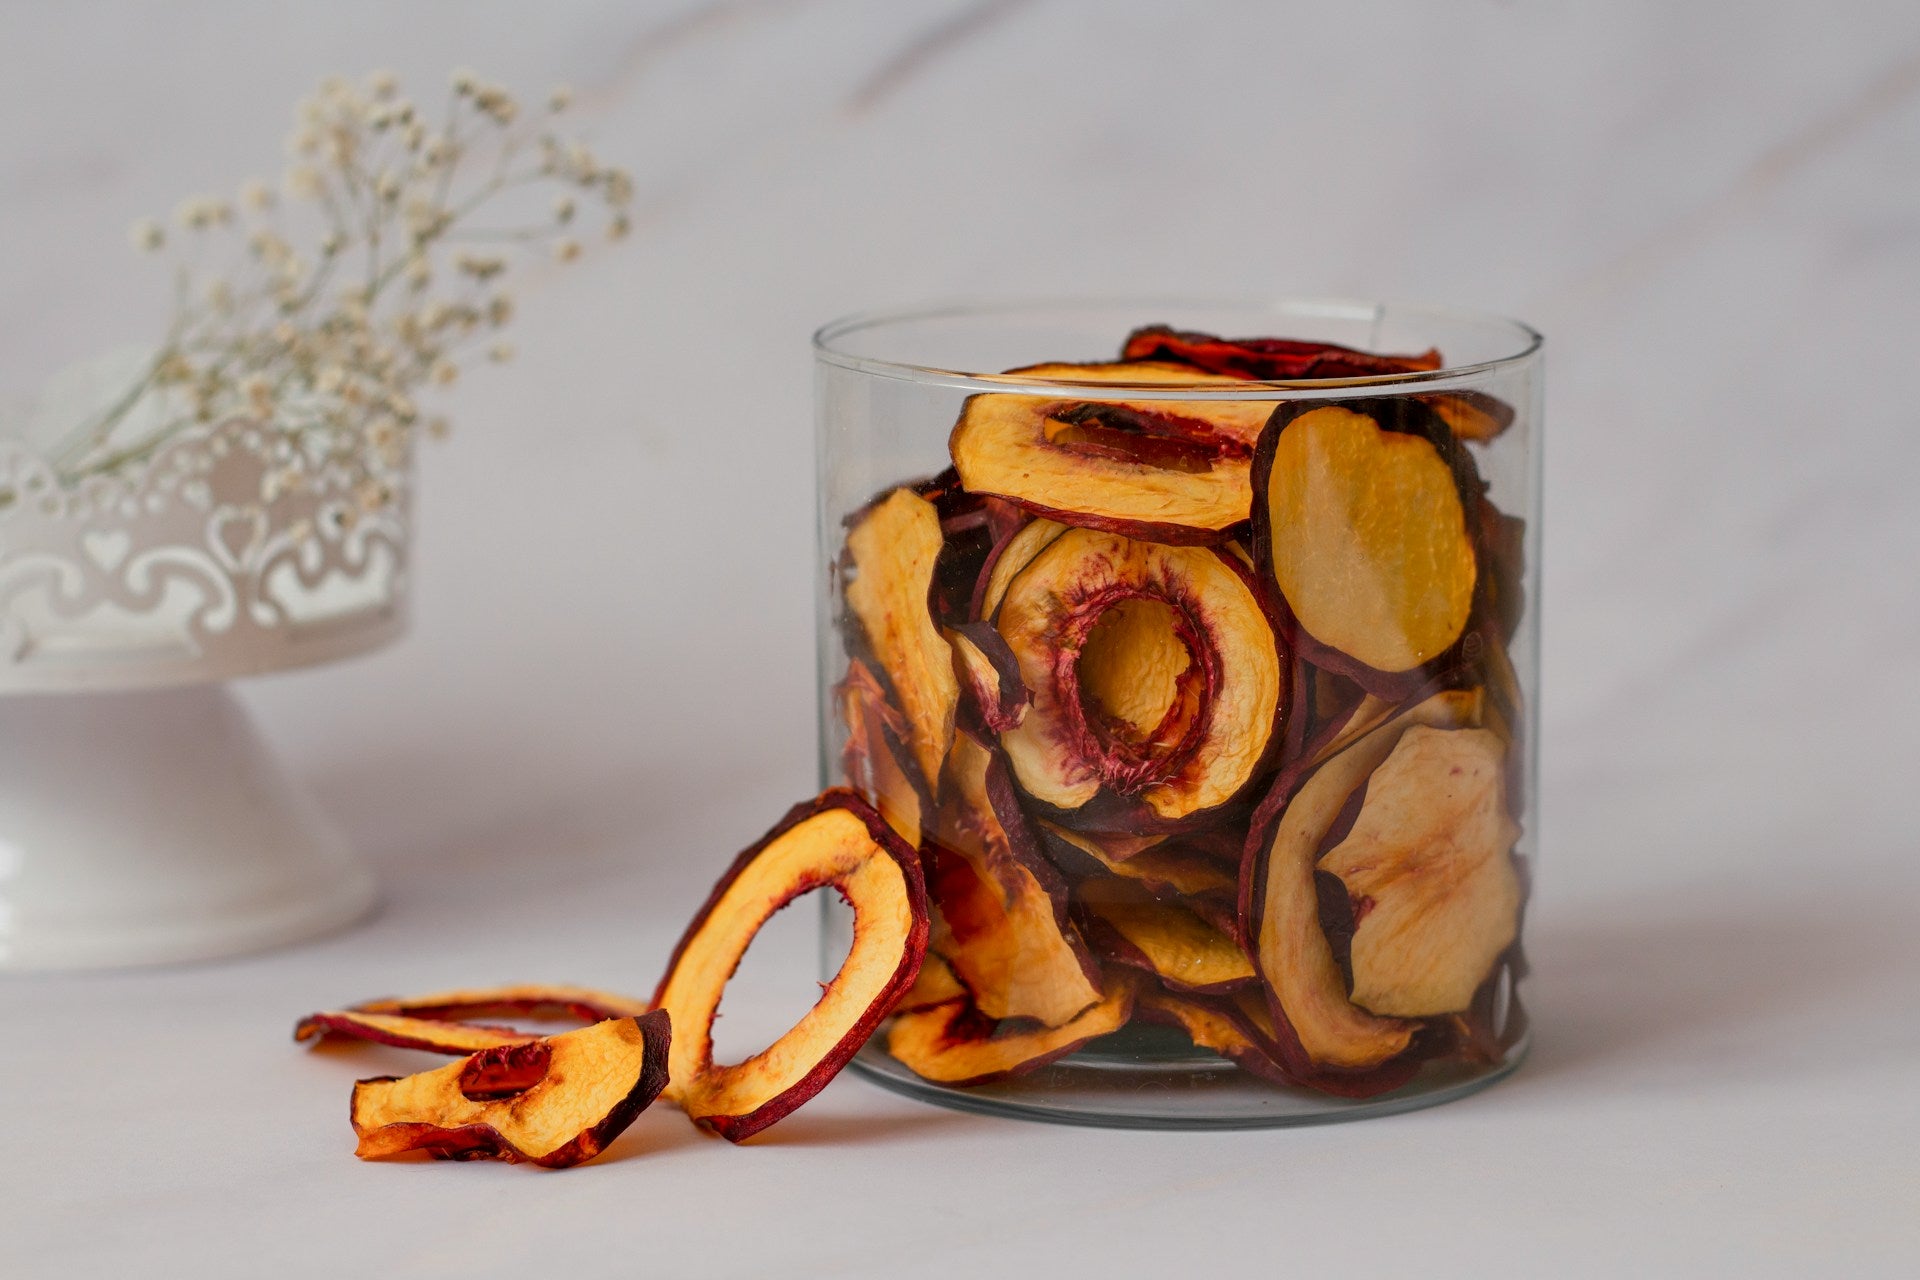 Top Dried Fruits You Can Buy in Bulk Online in the US